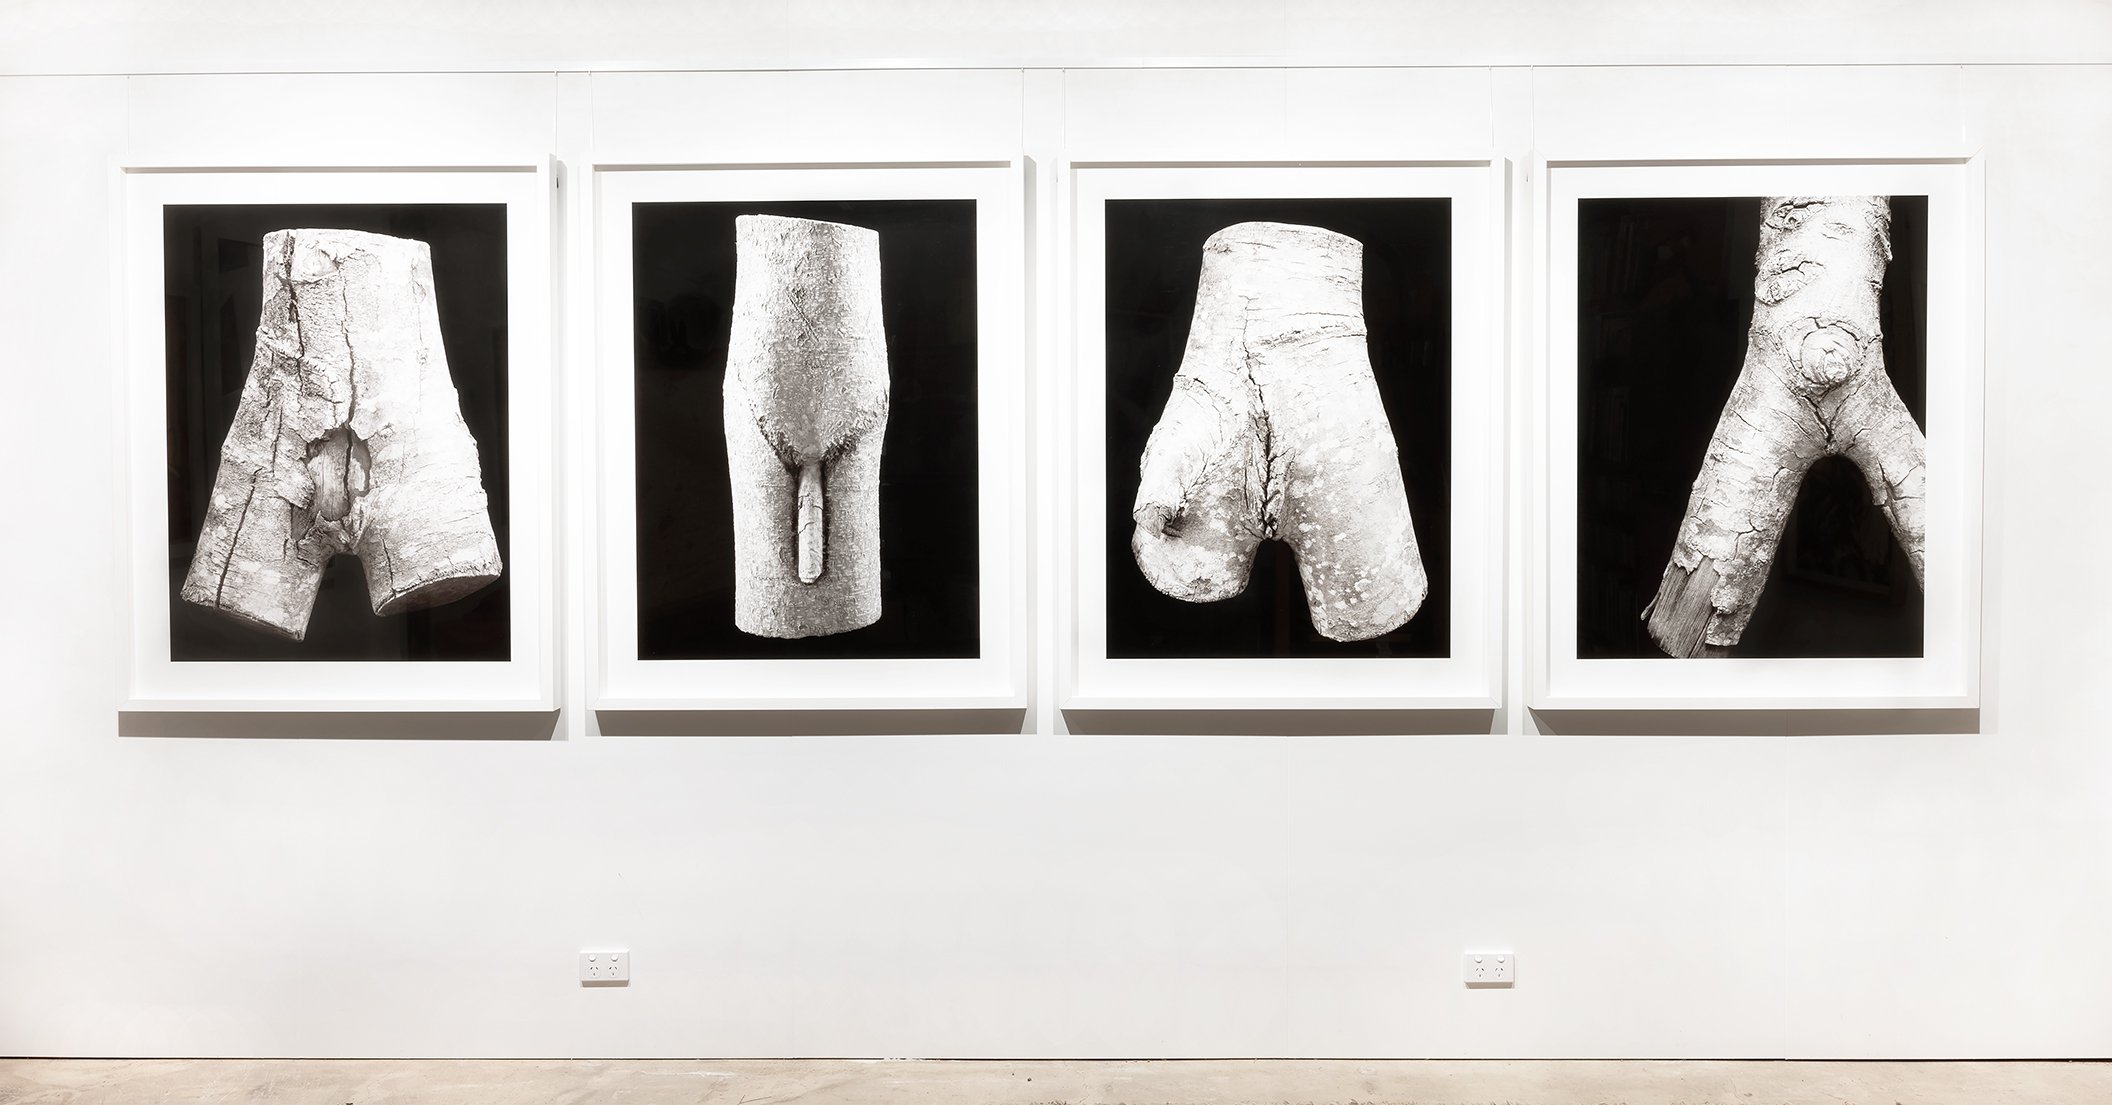    Wonders In The Woods     From The First Cultures Museum:  Fertility Fetishes 2,4,1,3,  2015 (Installation view; size 133cm x 445cm) 